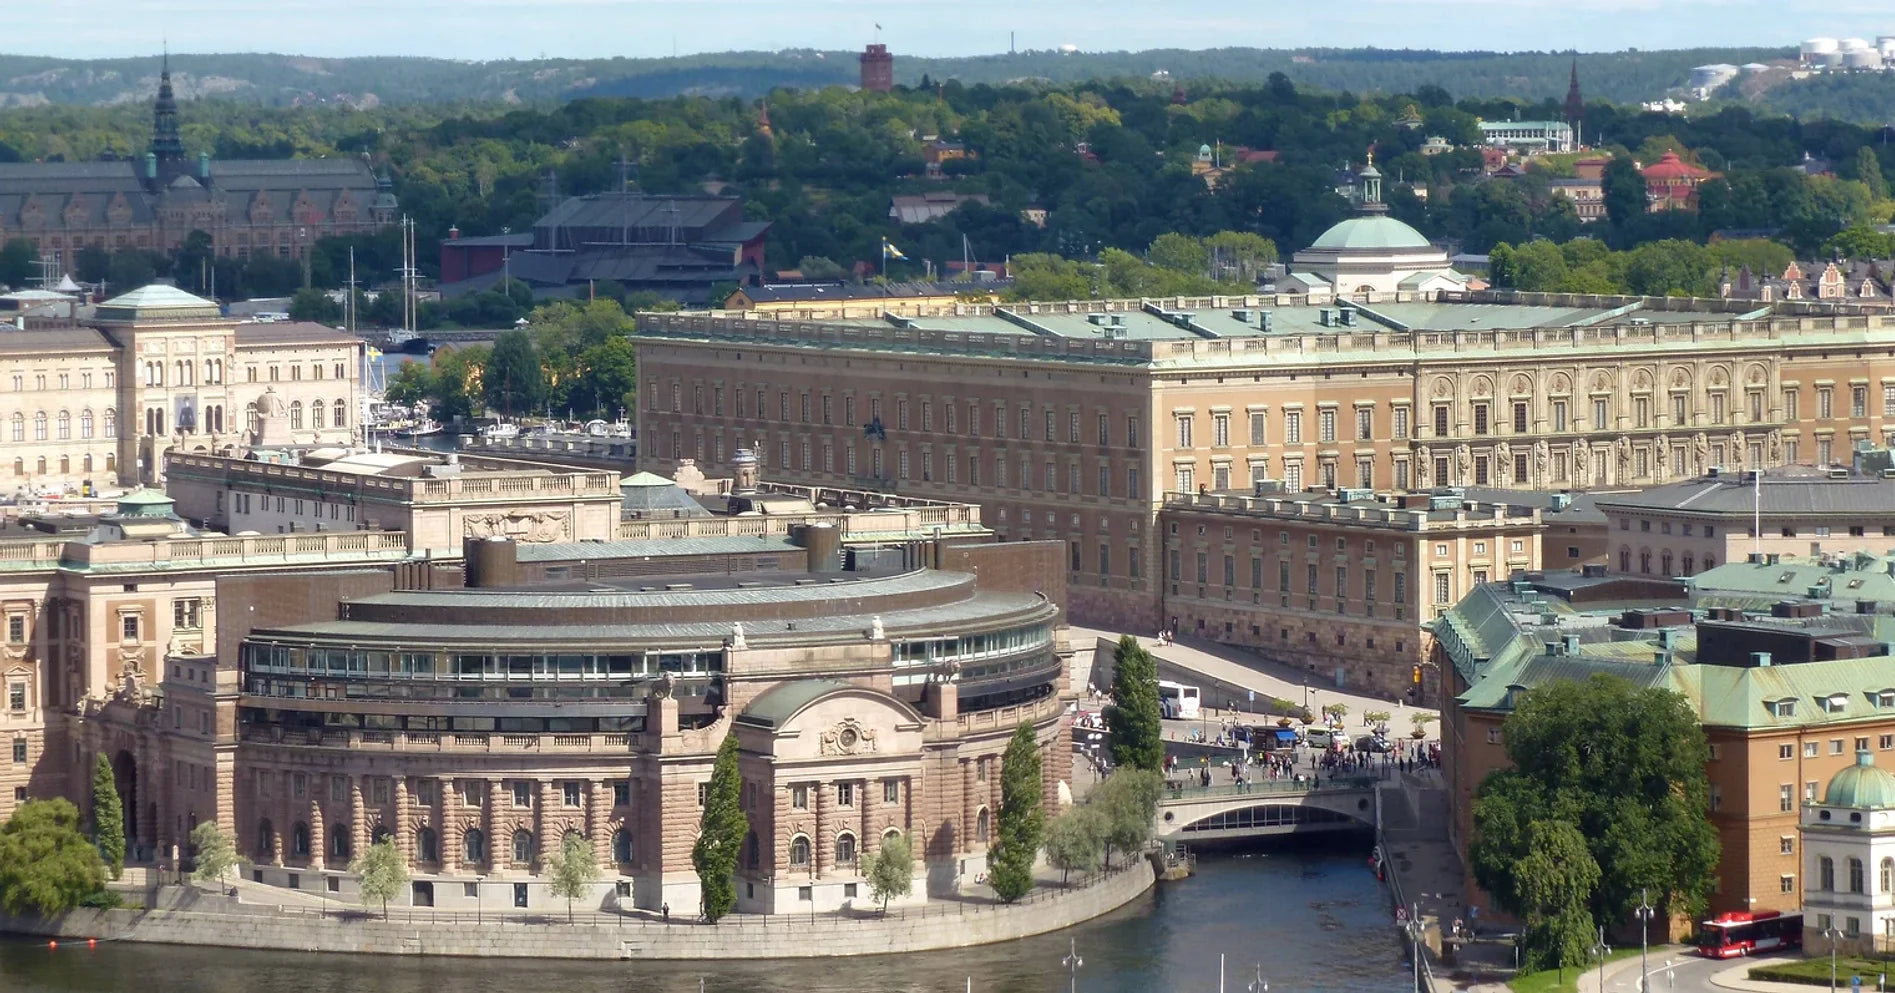 Stockholm (The Parliament) - An outdoor escape room